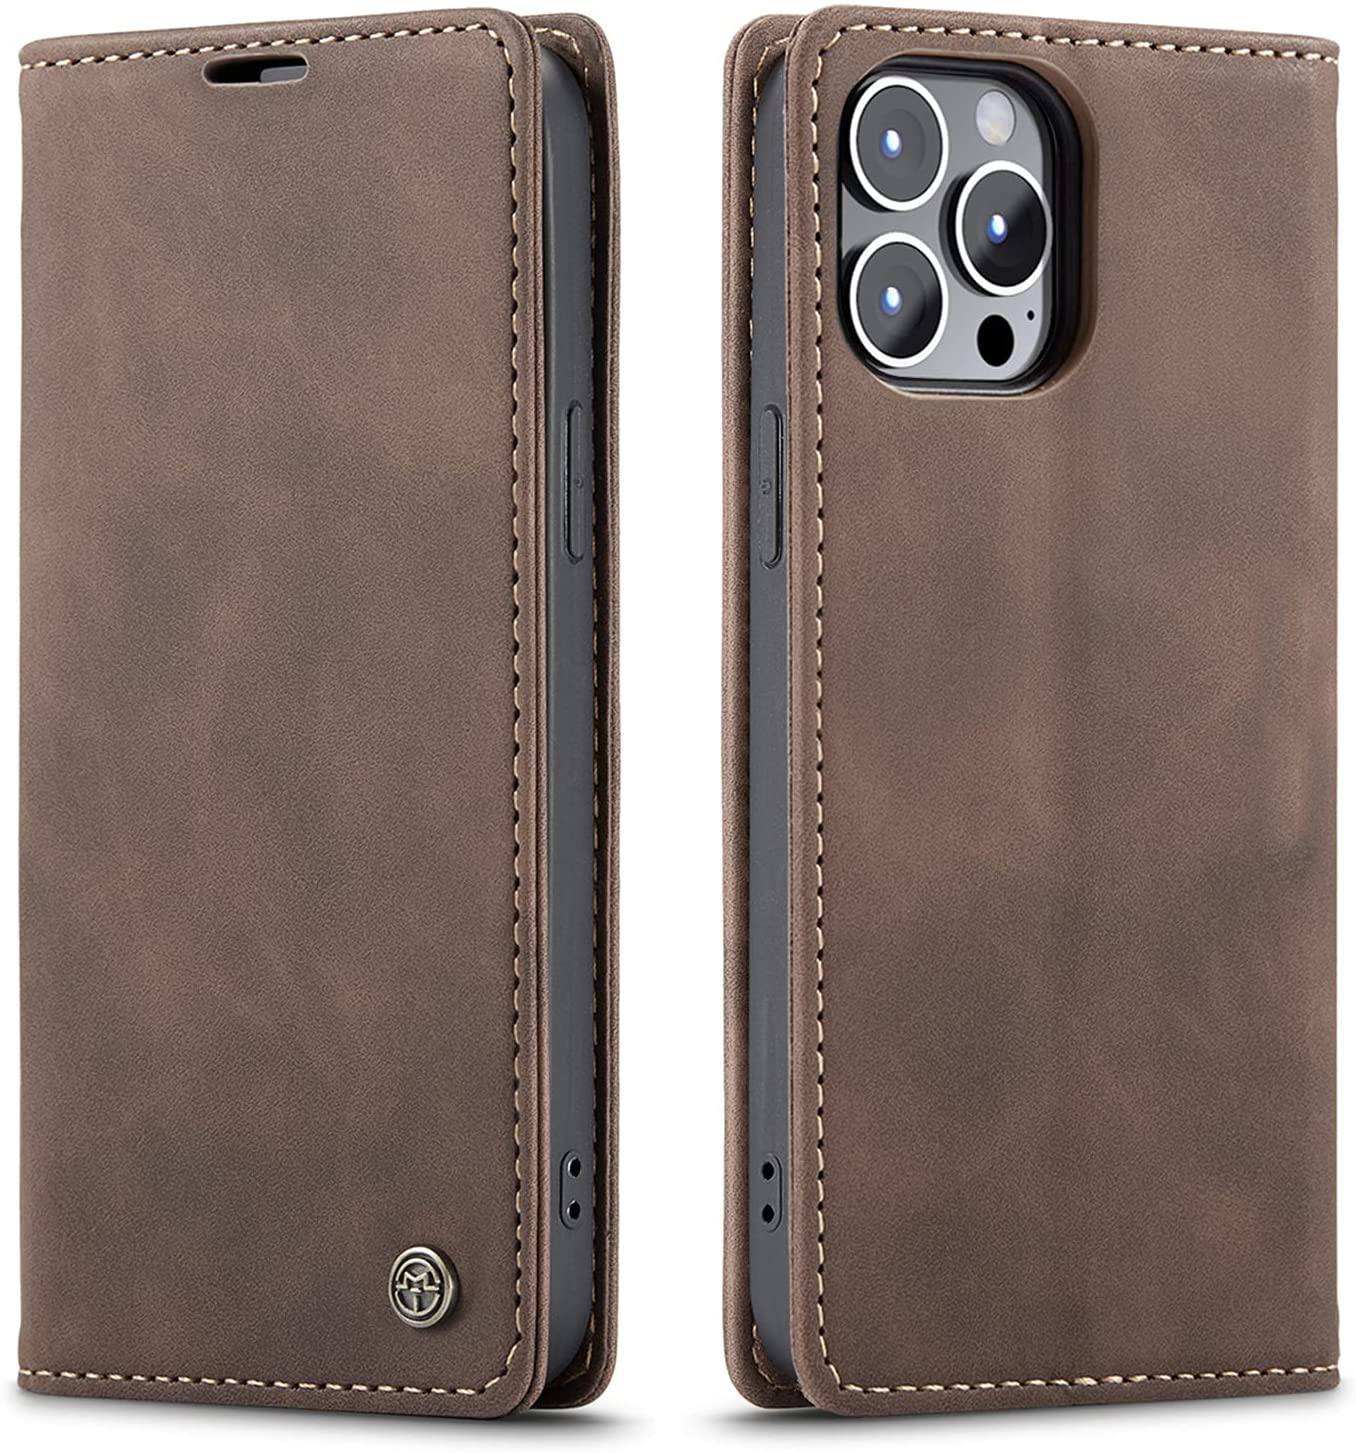 iPhone 13 Pro leather case cover with camera protection